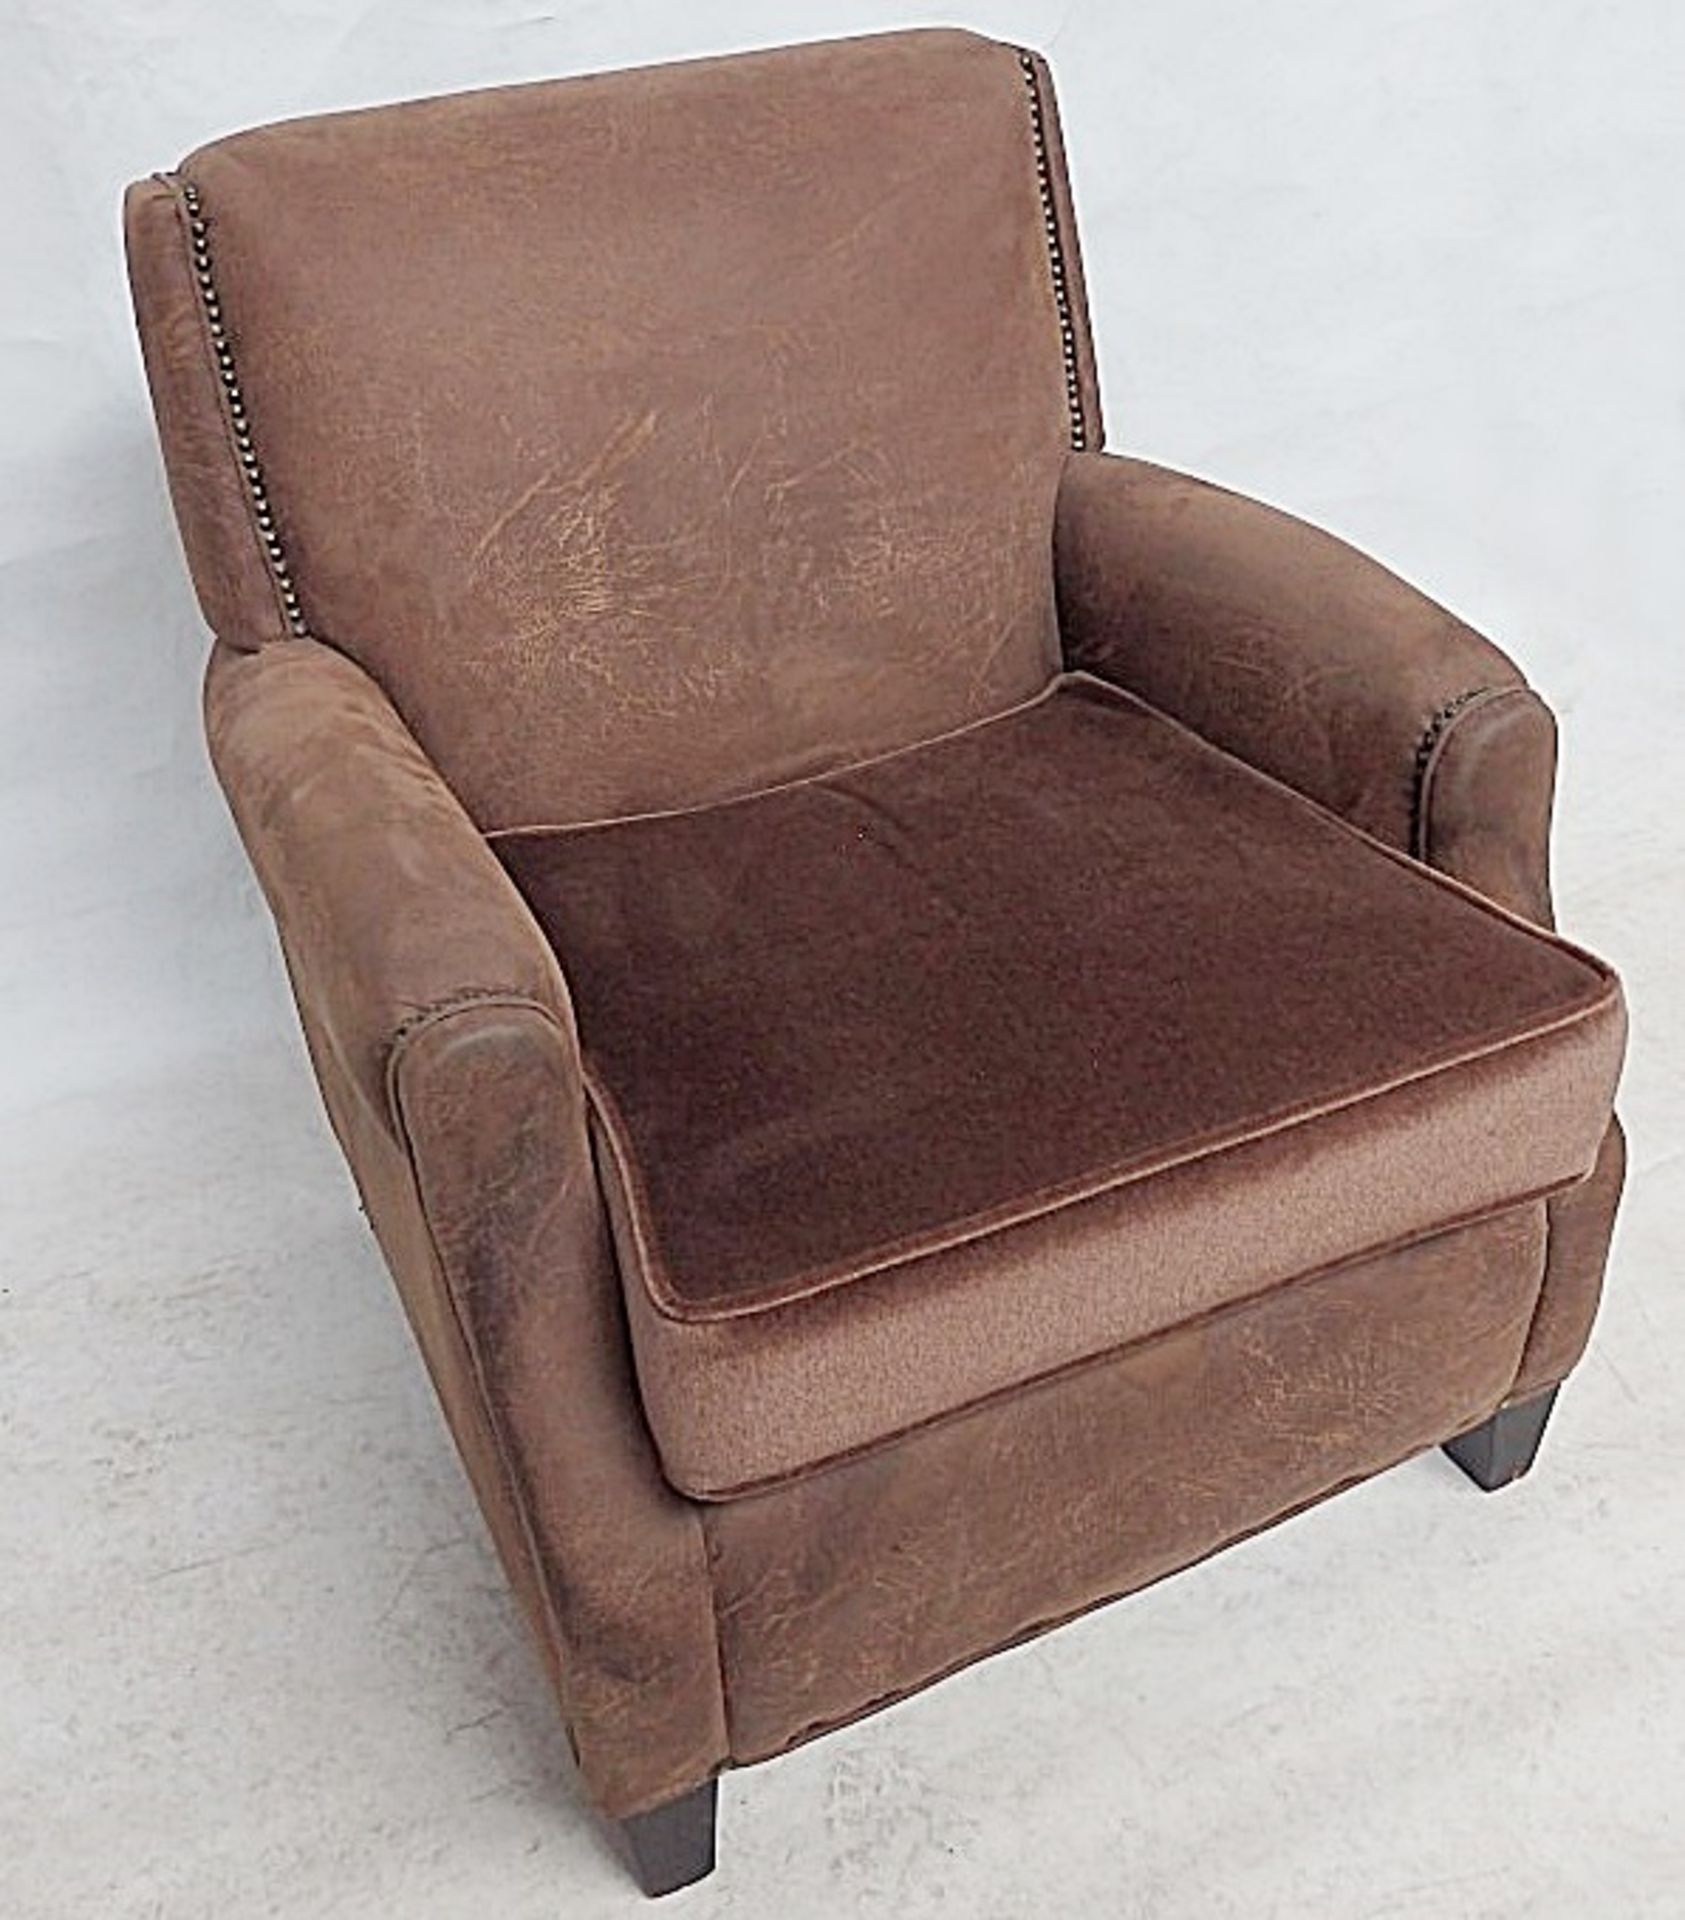 1 x Bespoke Brown Leather & Chenille Armchair - Expertly Built And Upholstered By British - Image 6 of 9